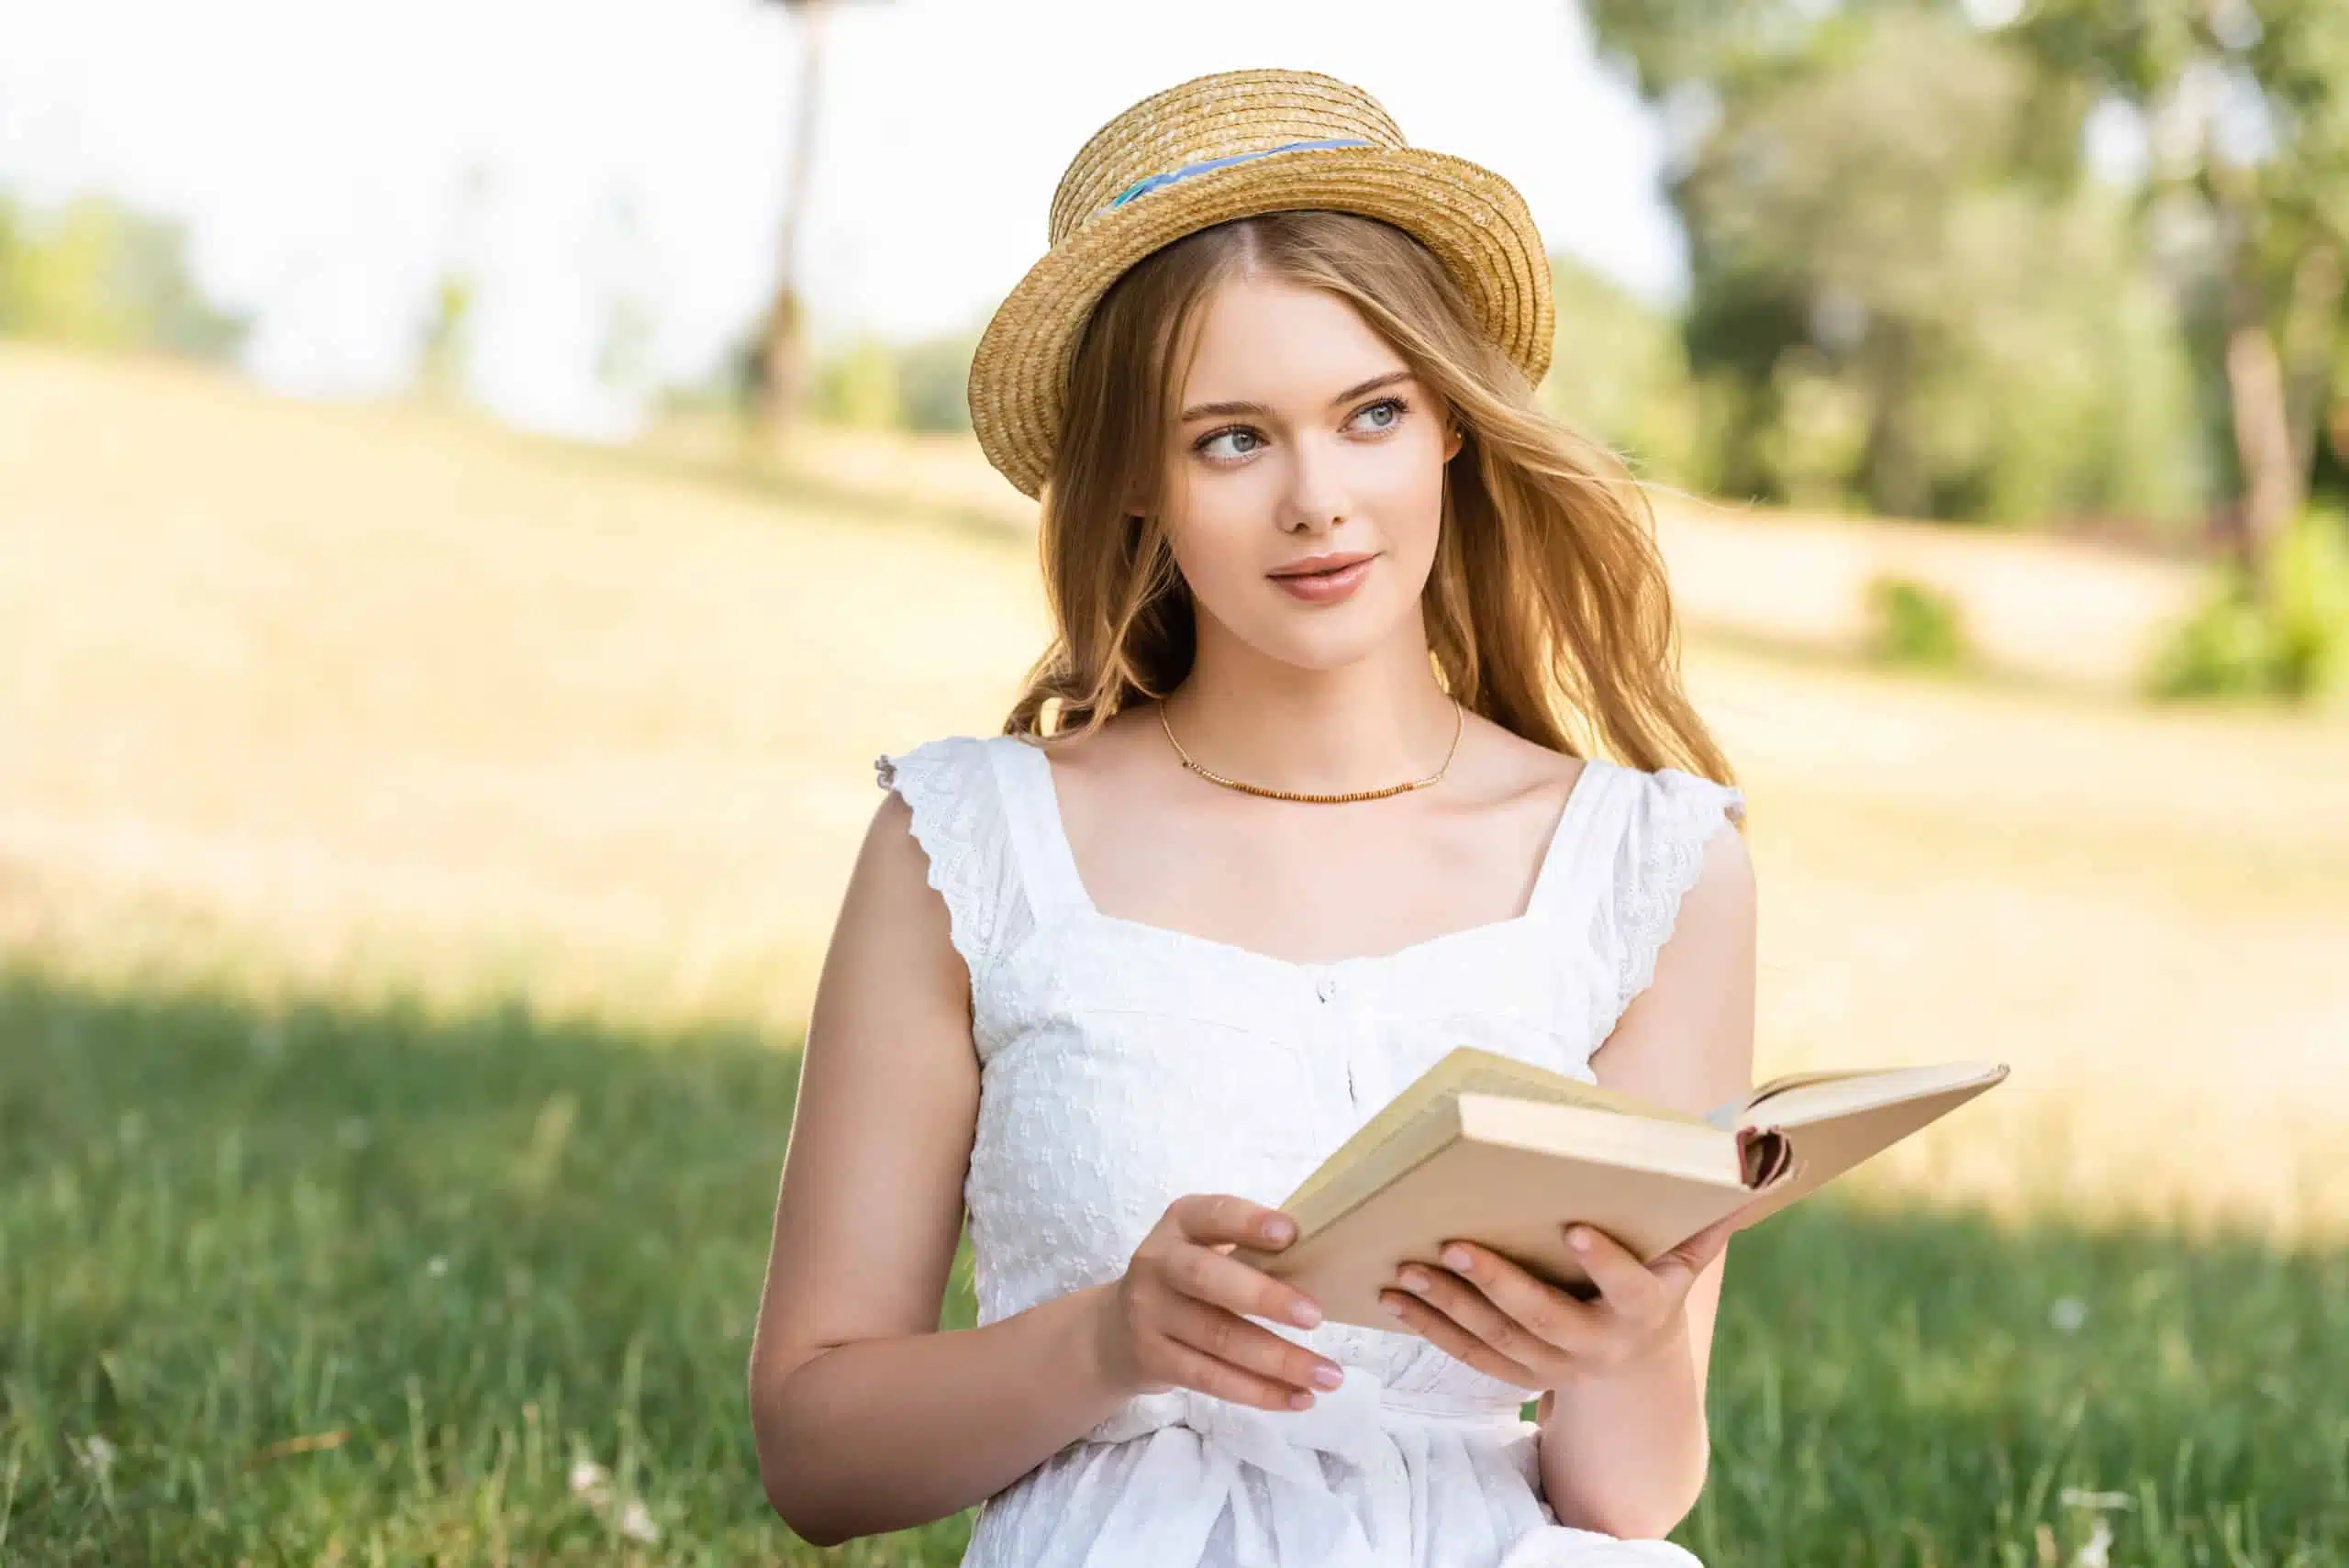 Beautiful woman in white dress and straw hat holding book while sitting on a meadow.